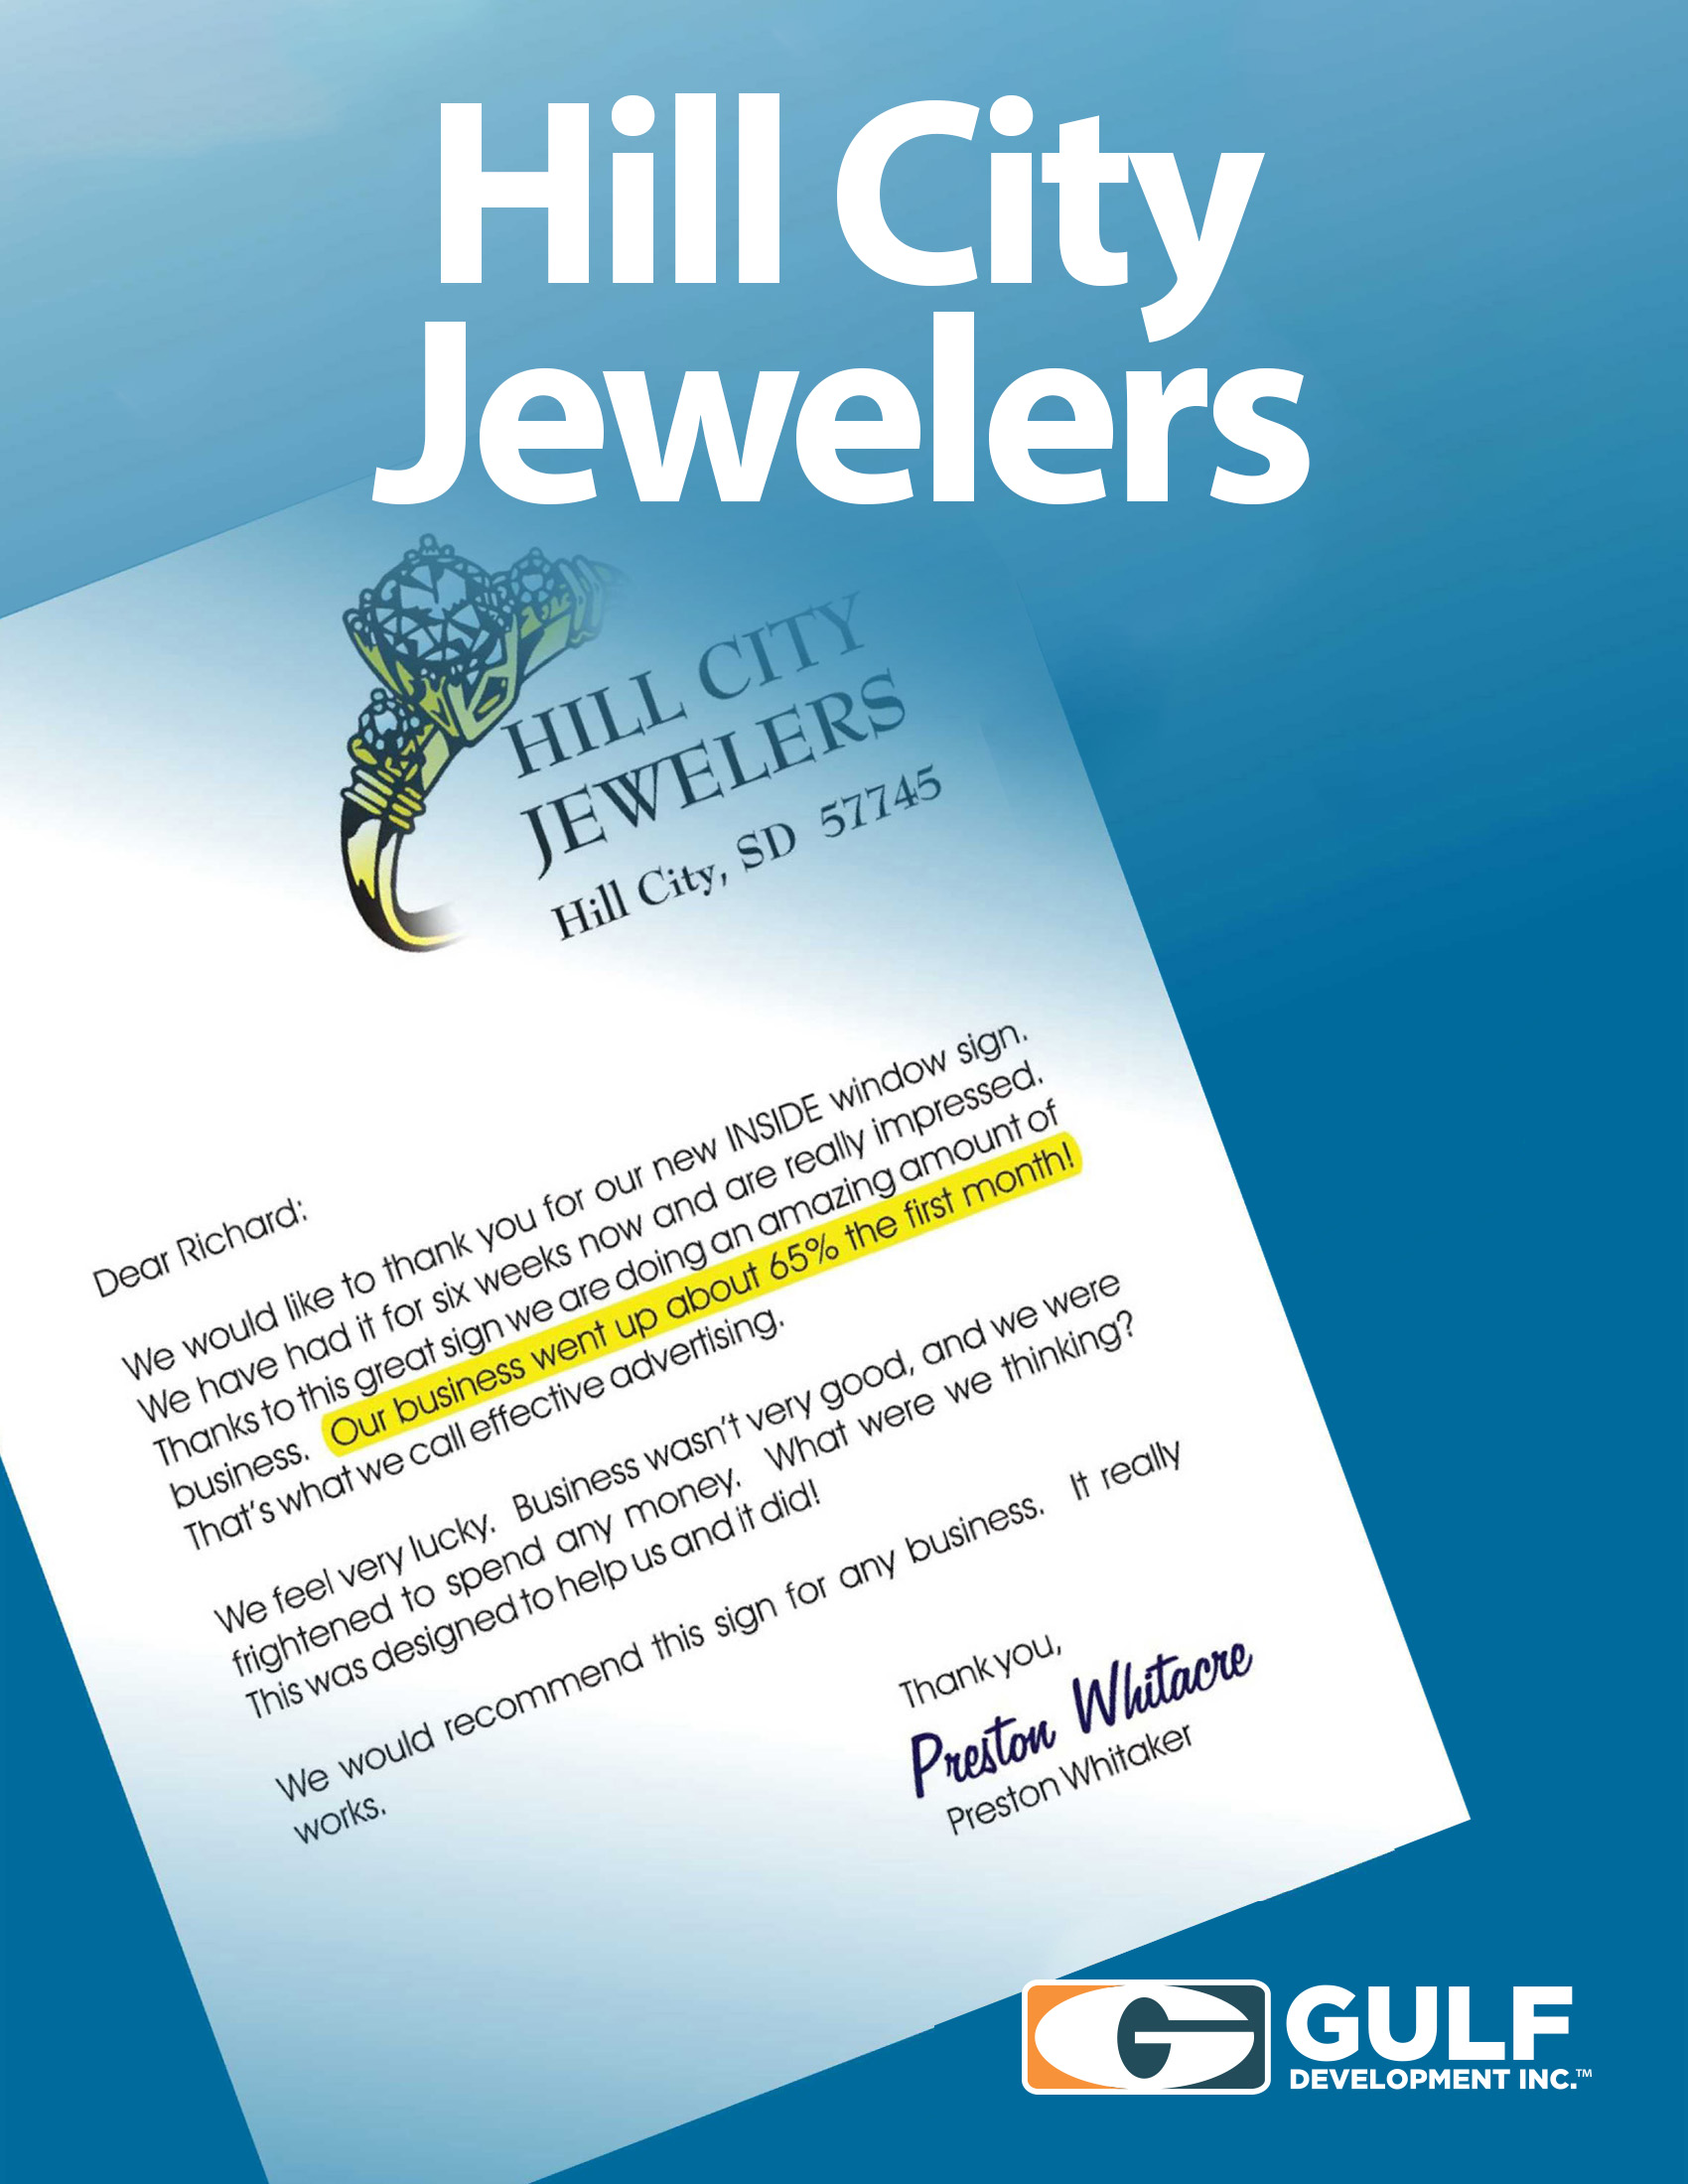 Hill City Jewelers Testimonial Letter